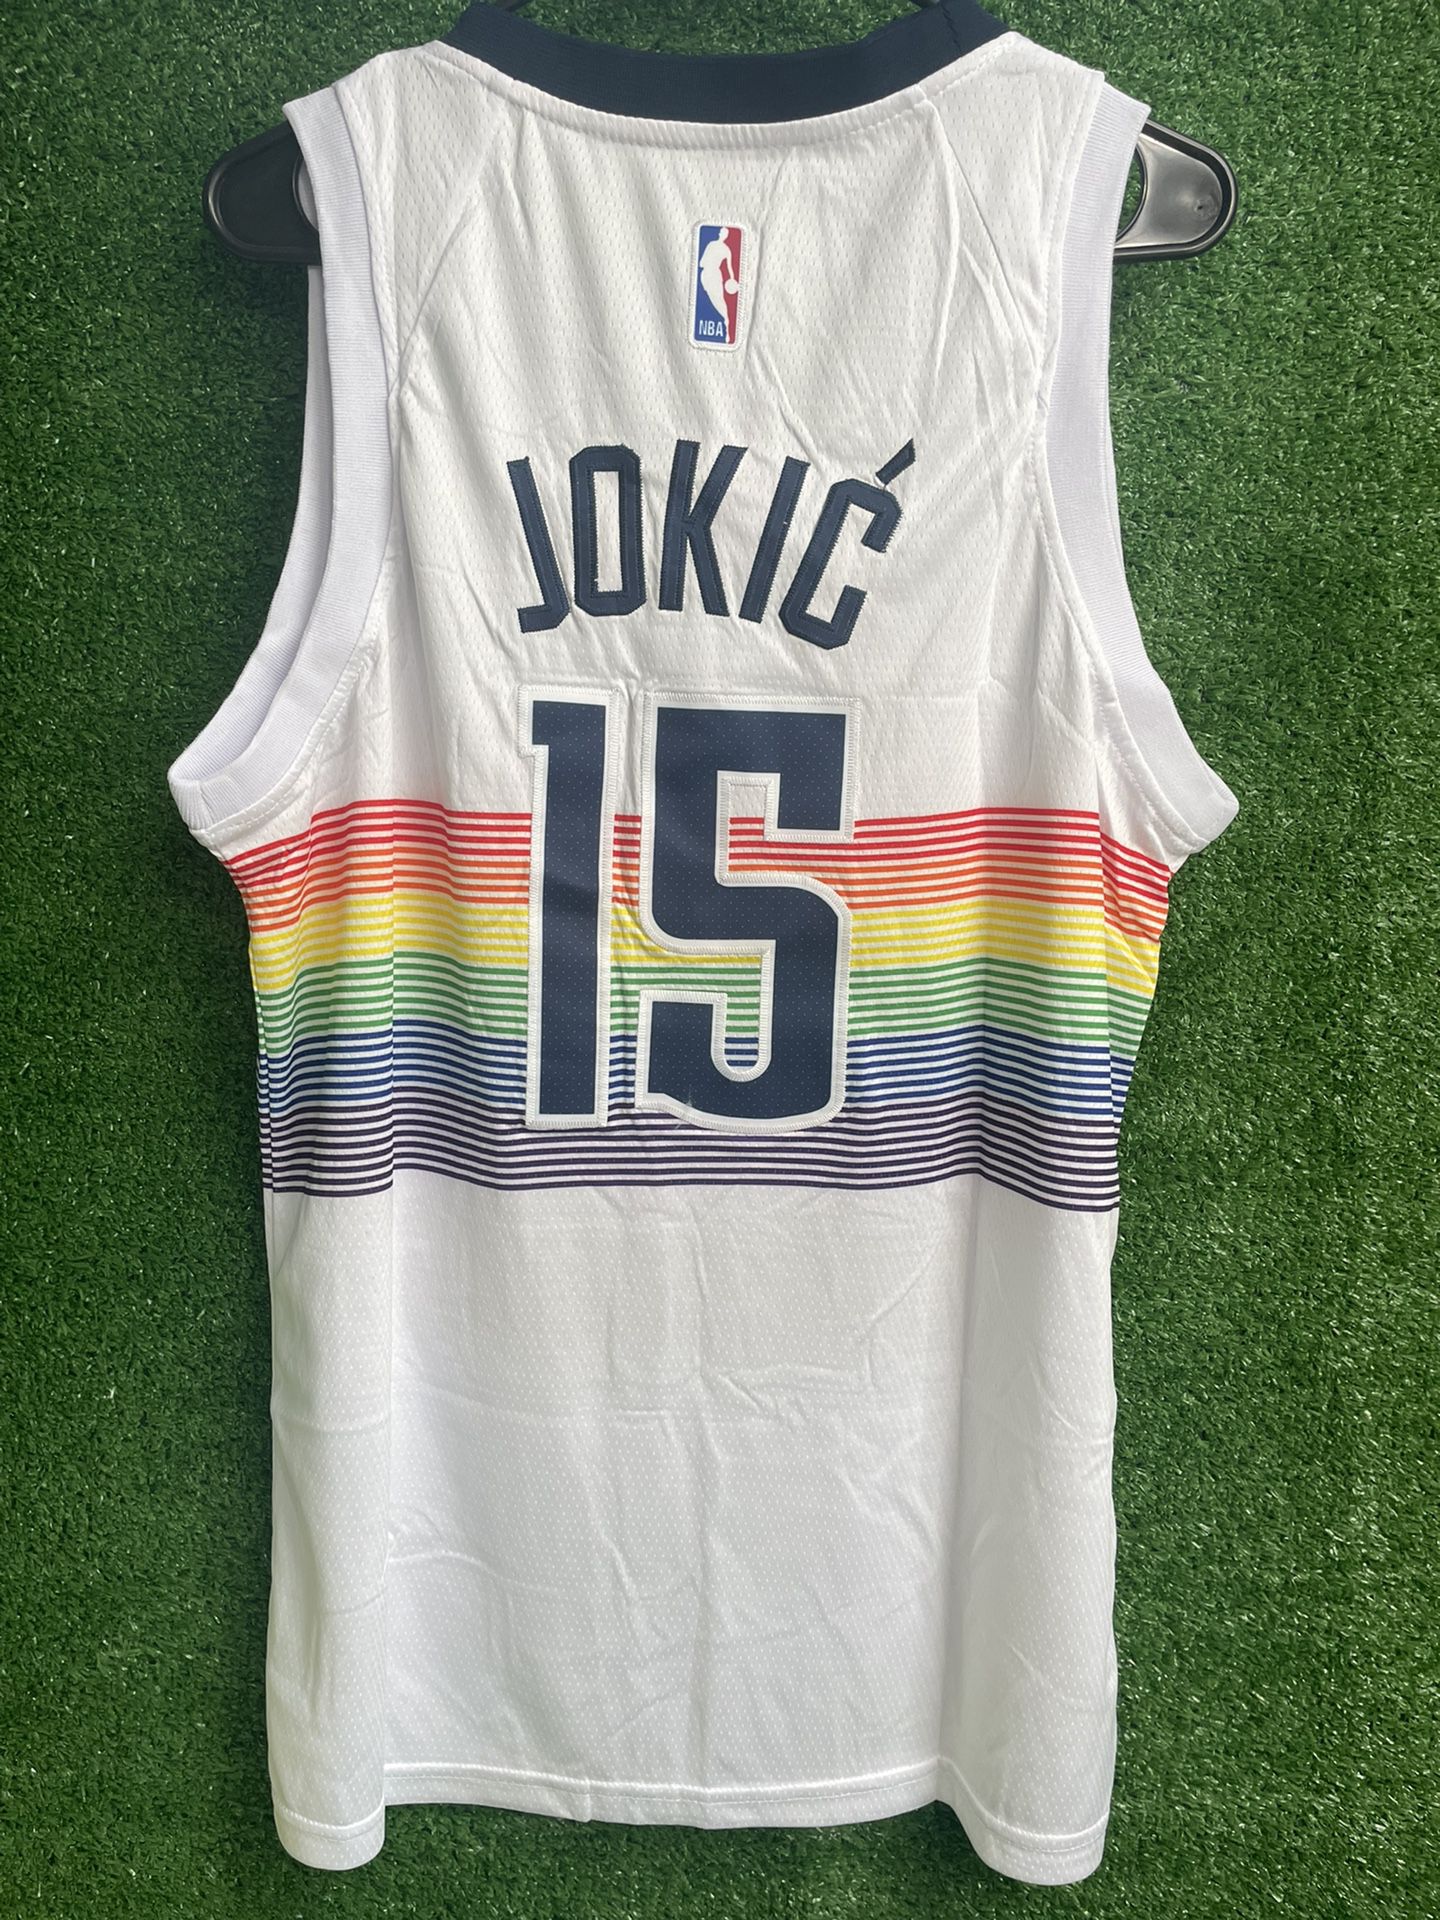 Jokic Black Jersey Med. New With Tags Stitched for Sale in Thornton, CO -  OfferUp